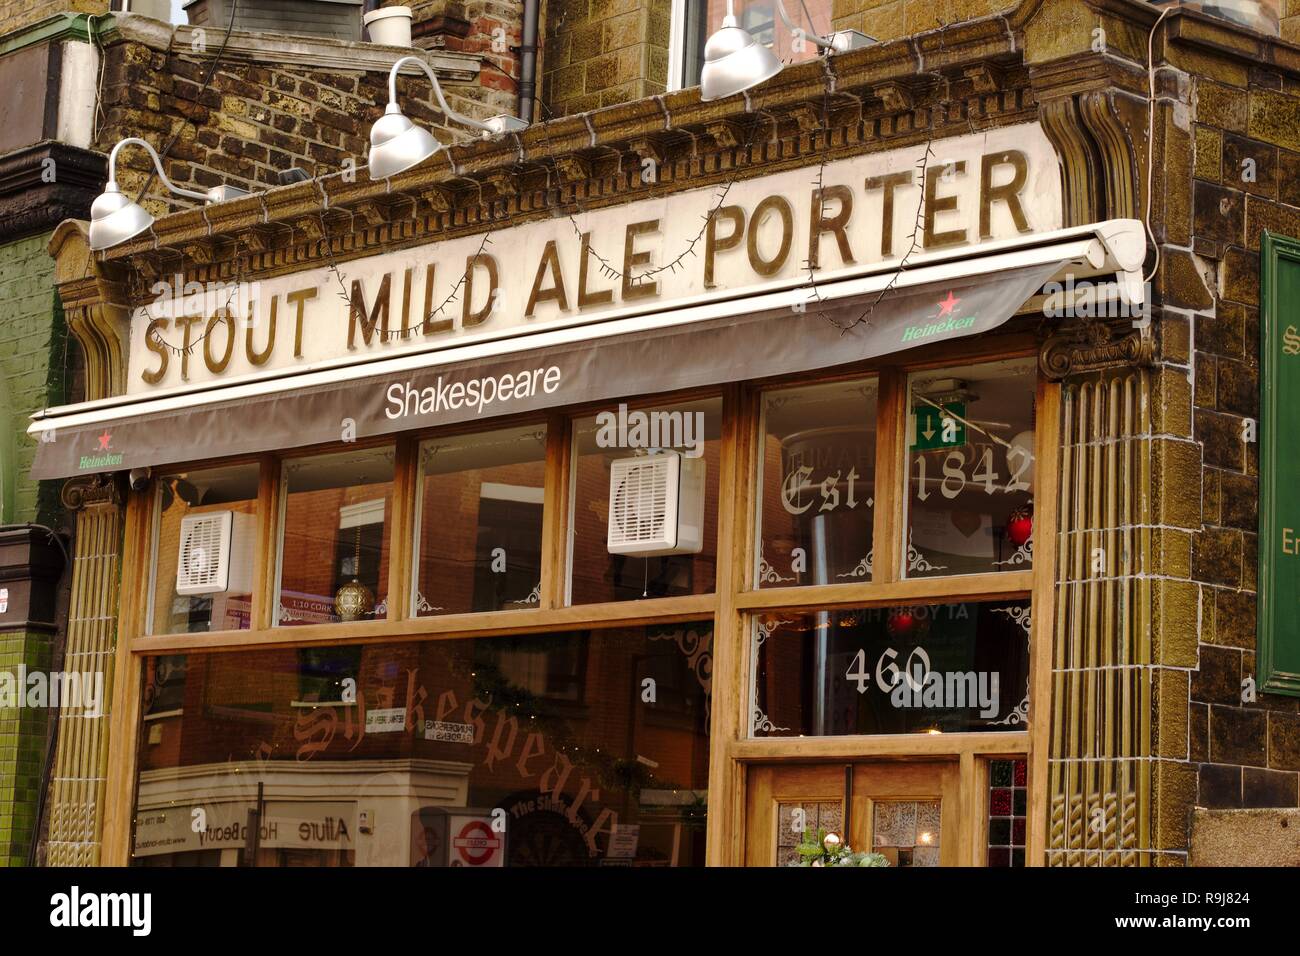 The Shakespeare pub in Bethnal Green, East London, with a sign outside of it that says 'Stout mild ale porter' Stock Photo